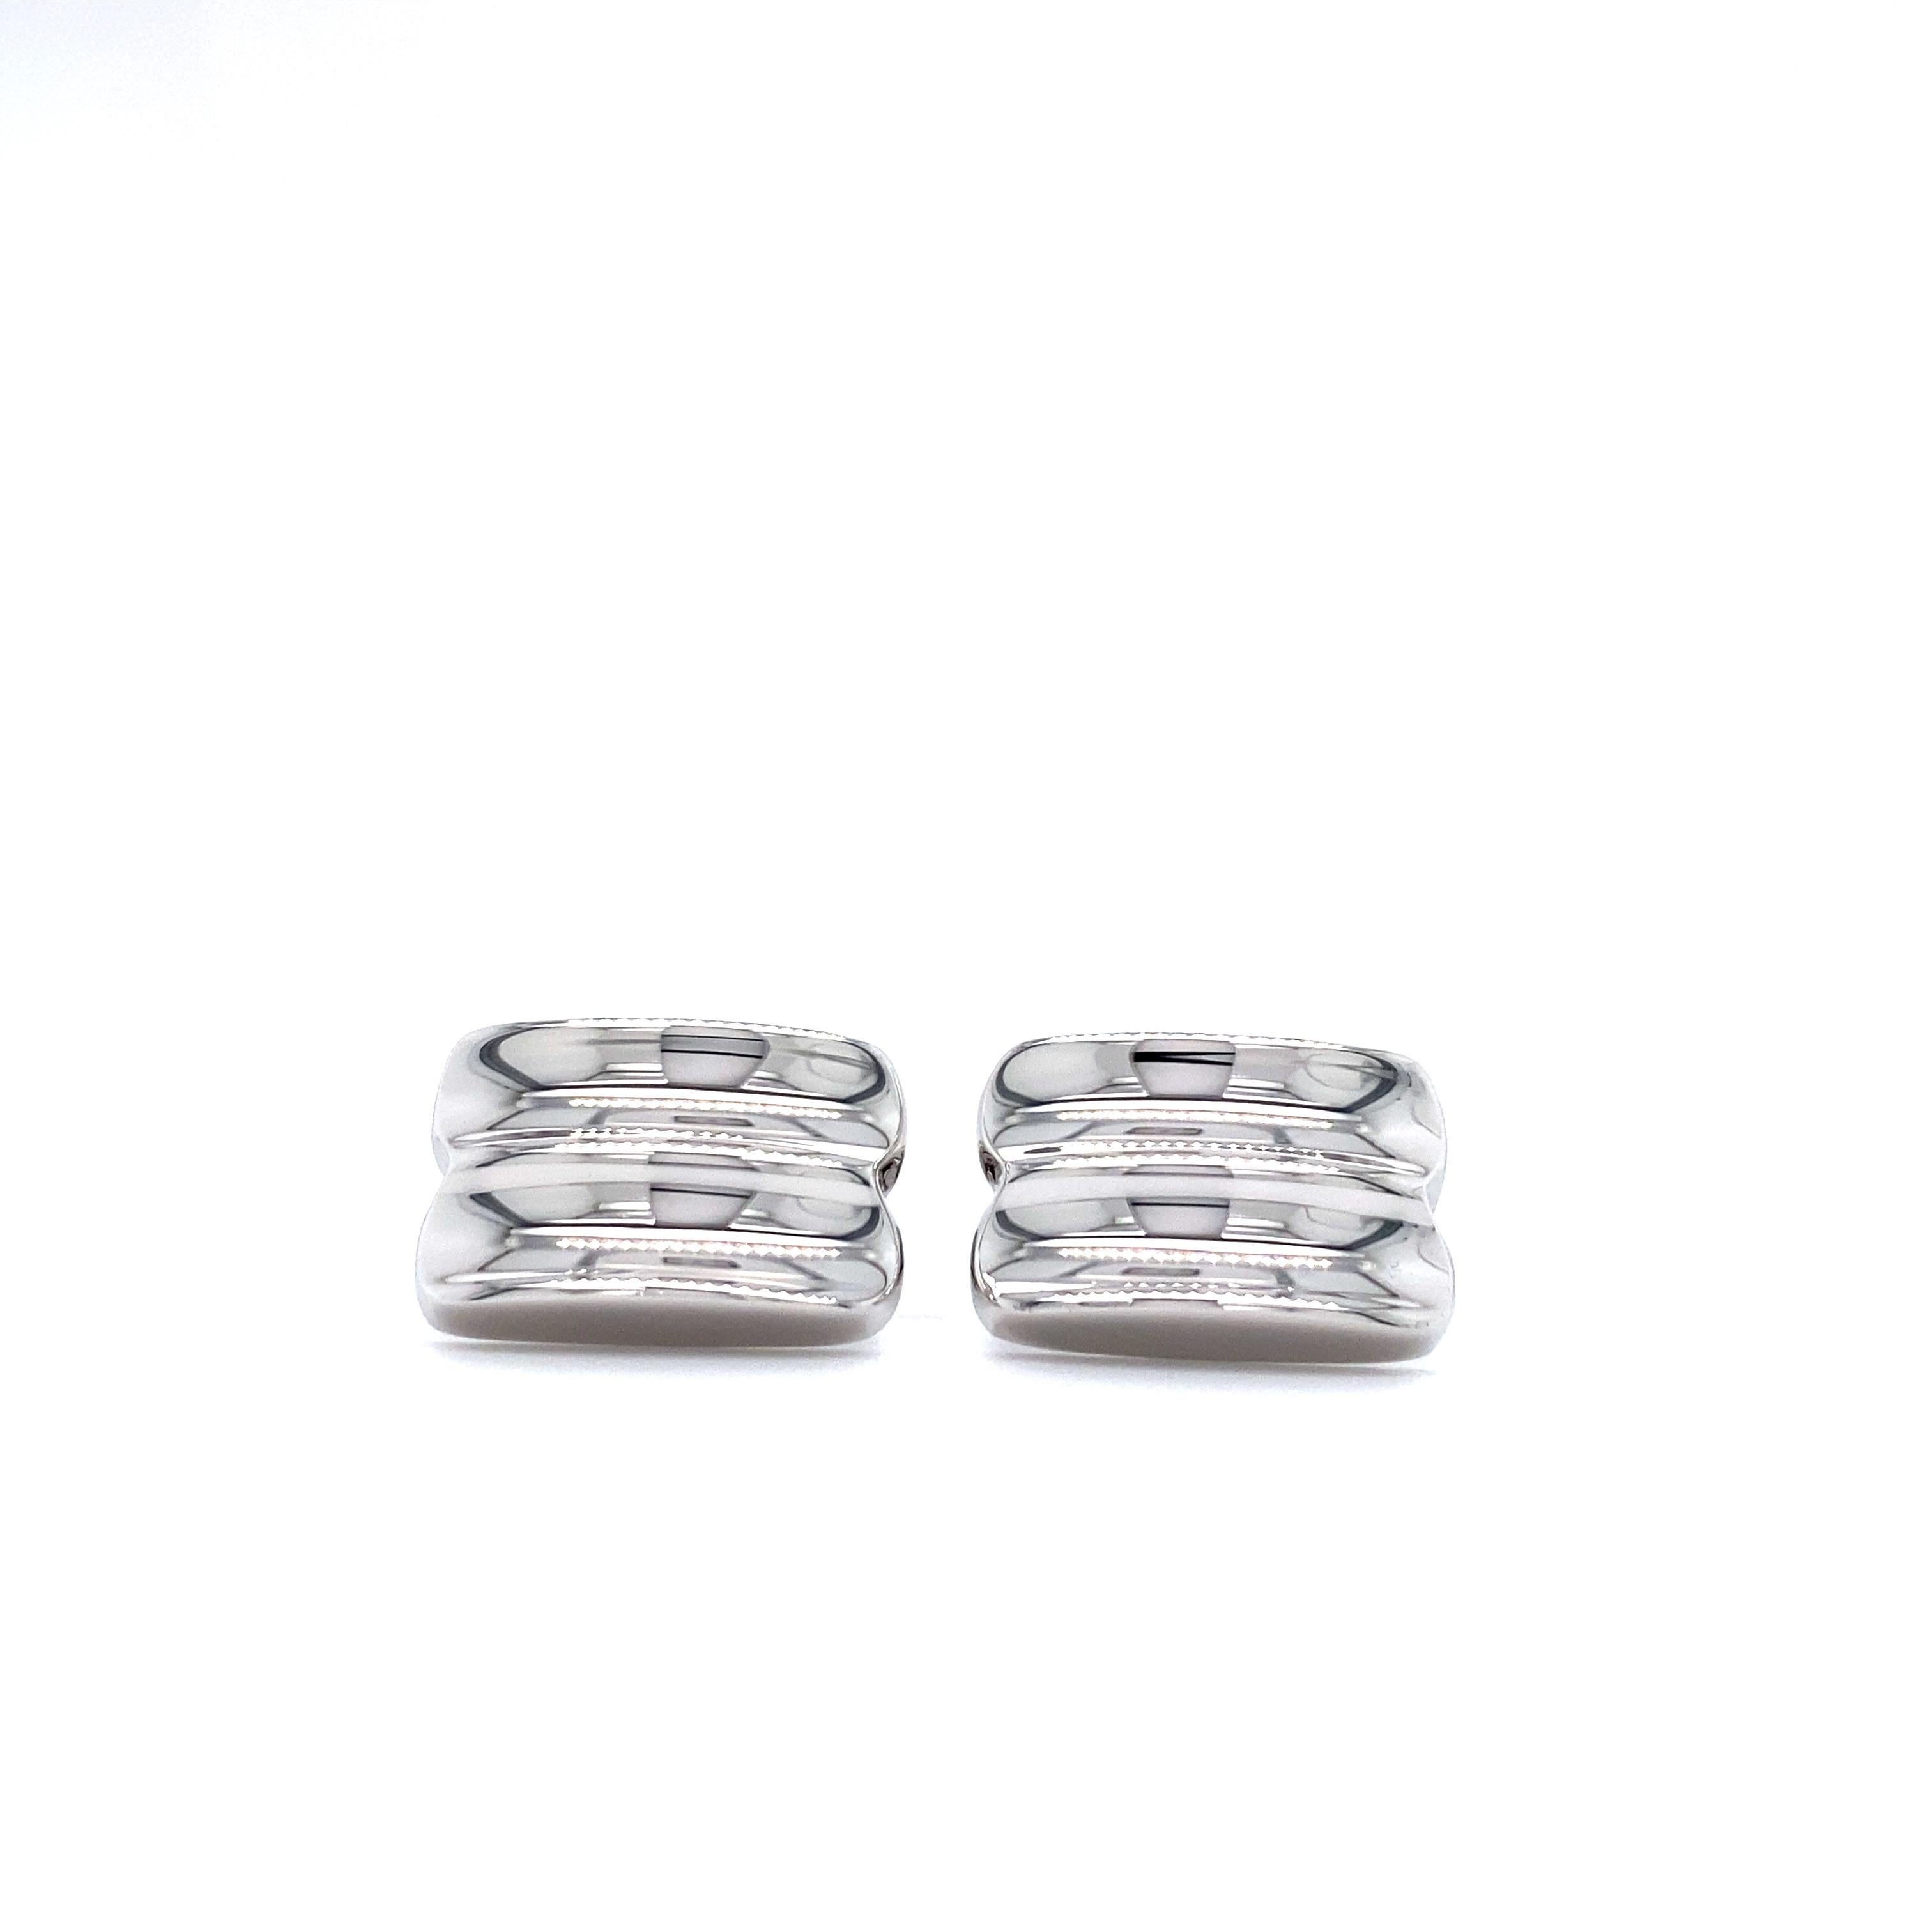 Fluted Rectangular Cufflinks in Solid 925 Sterling Silver, Rhodium Plated, 11.5 mm x 17 mm by Victor Mayer
Cufflinks made in the workshop of VICTOR MAYER in Pforzheim, Germany. The quality meets the highest standards: solid execution with a coating